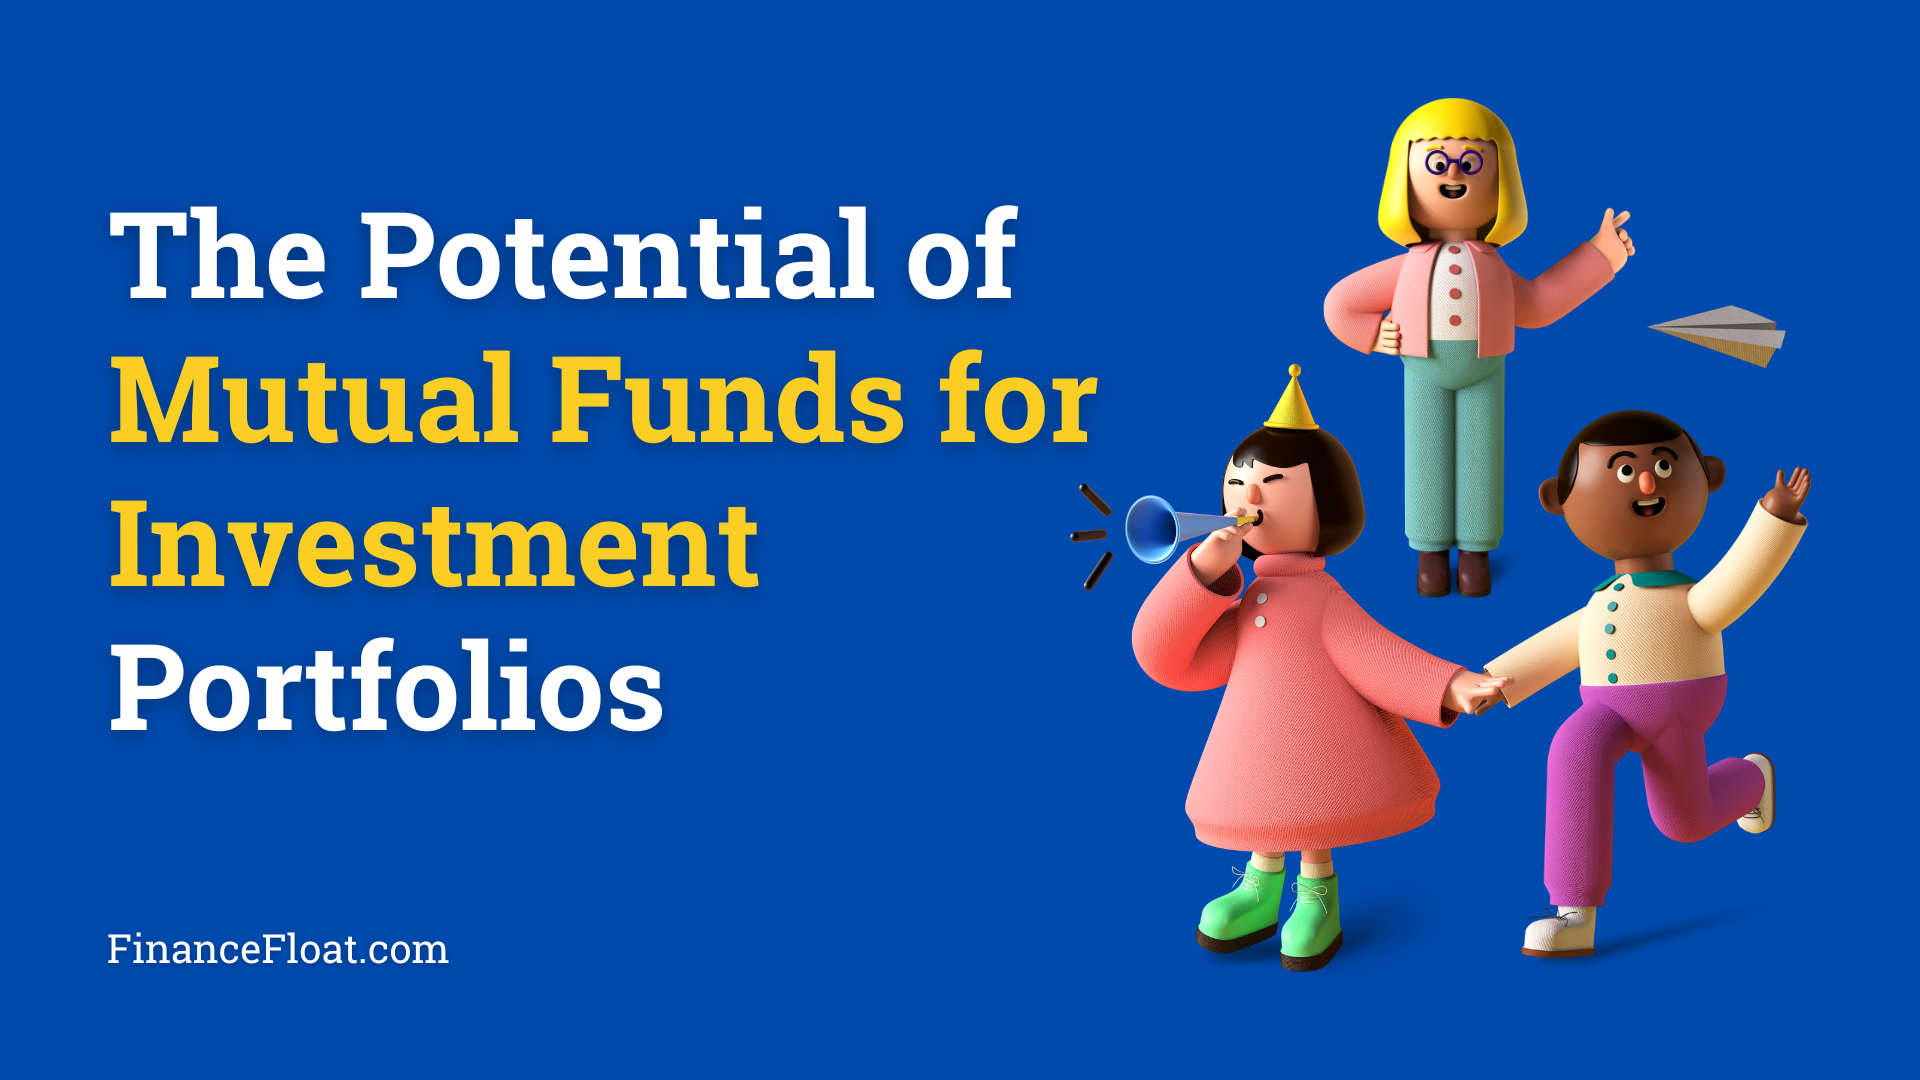 The Potential of Mutual Funds for Investment Portfolios